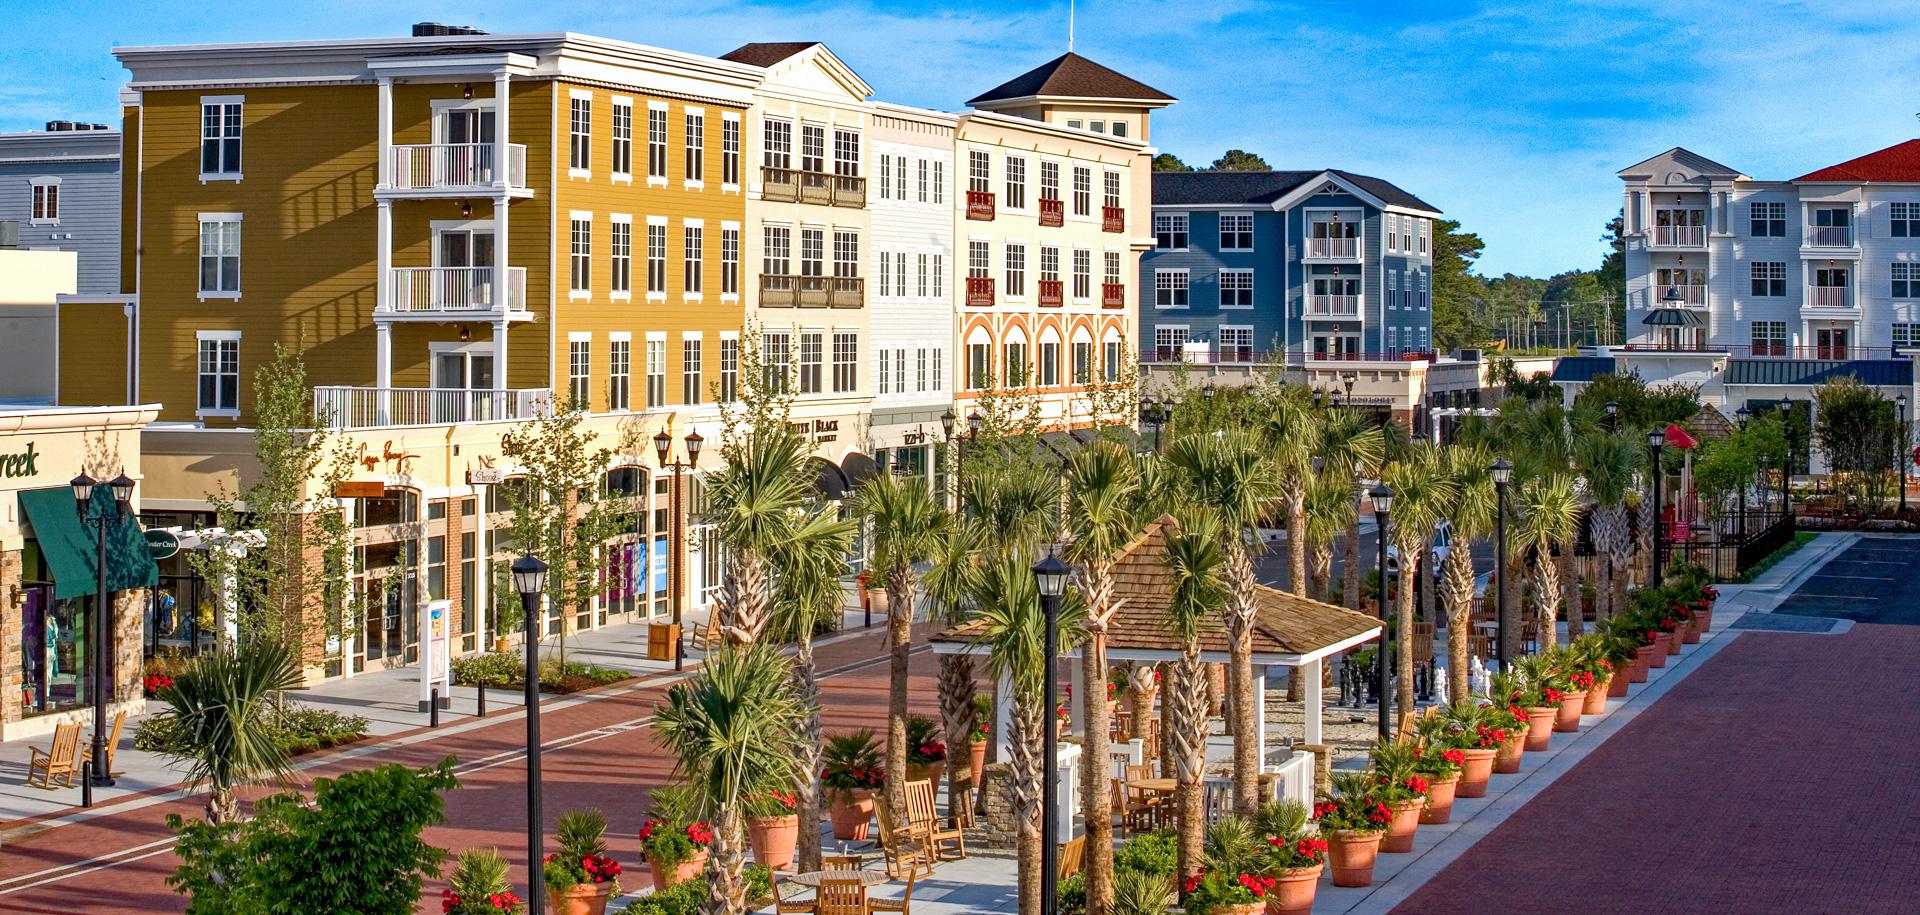 homes for sale in Grande Dunes community of Myrtle Beach